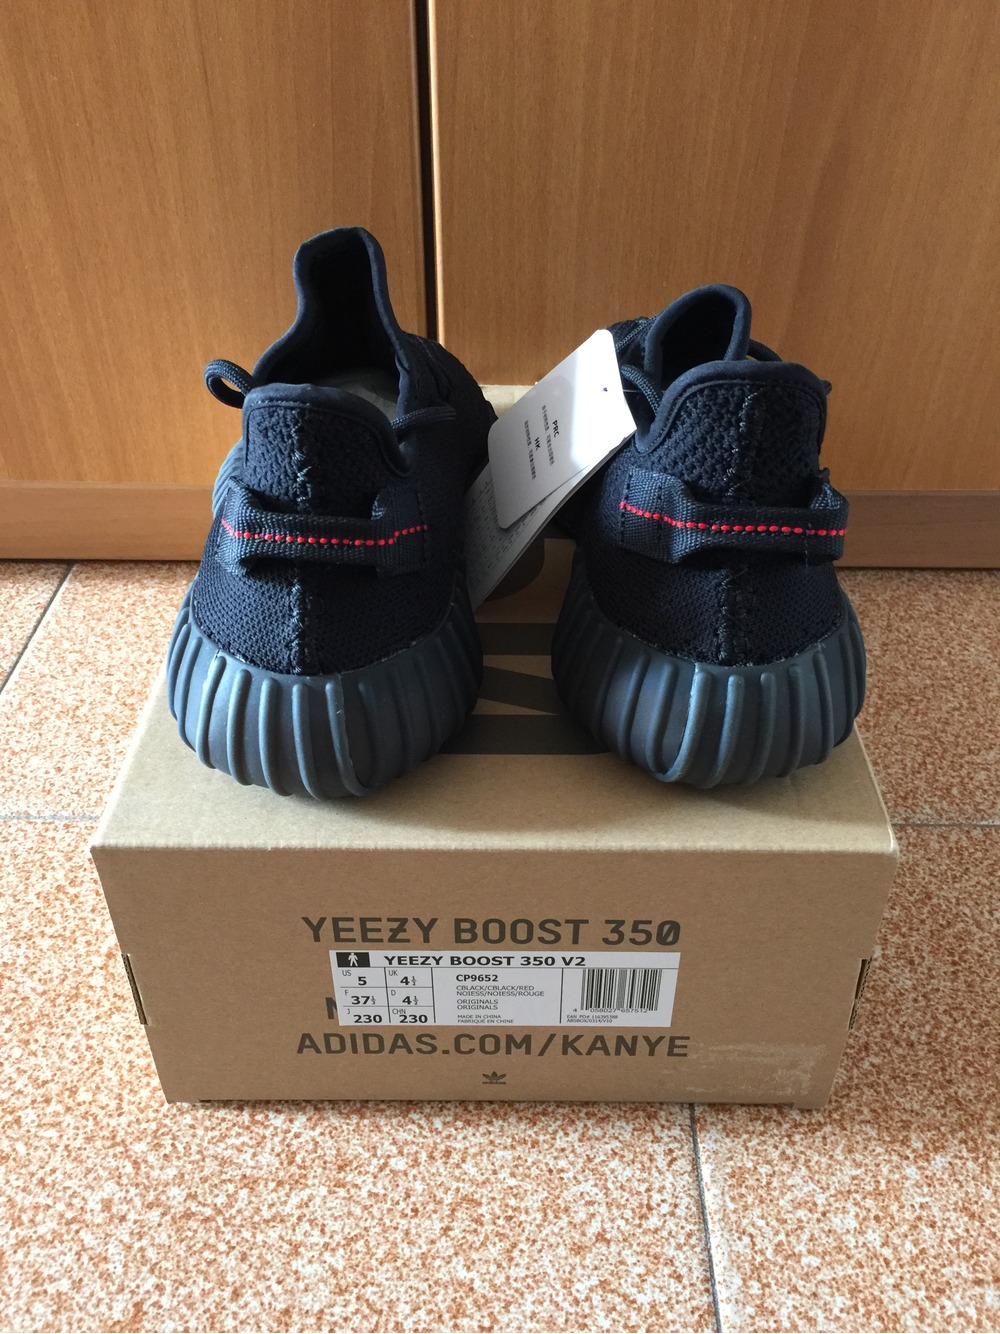 Infant Final Version Adidas Yeezy Boost 350 V2 Sply Bred BB6372 